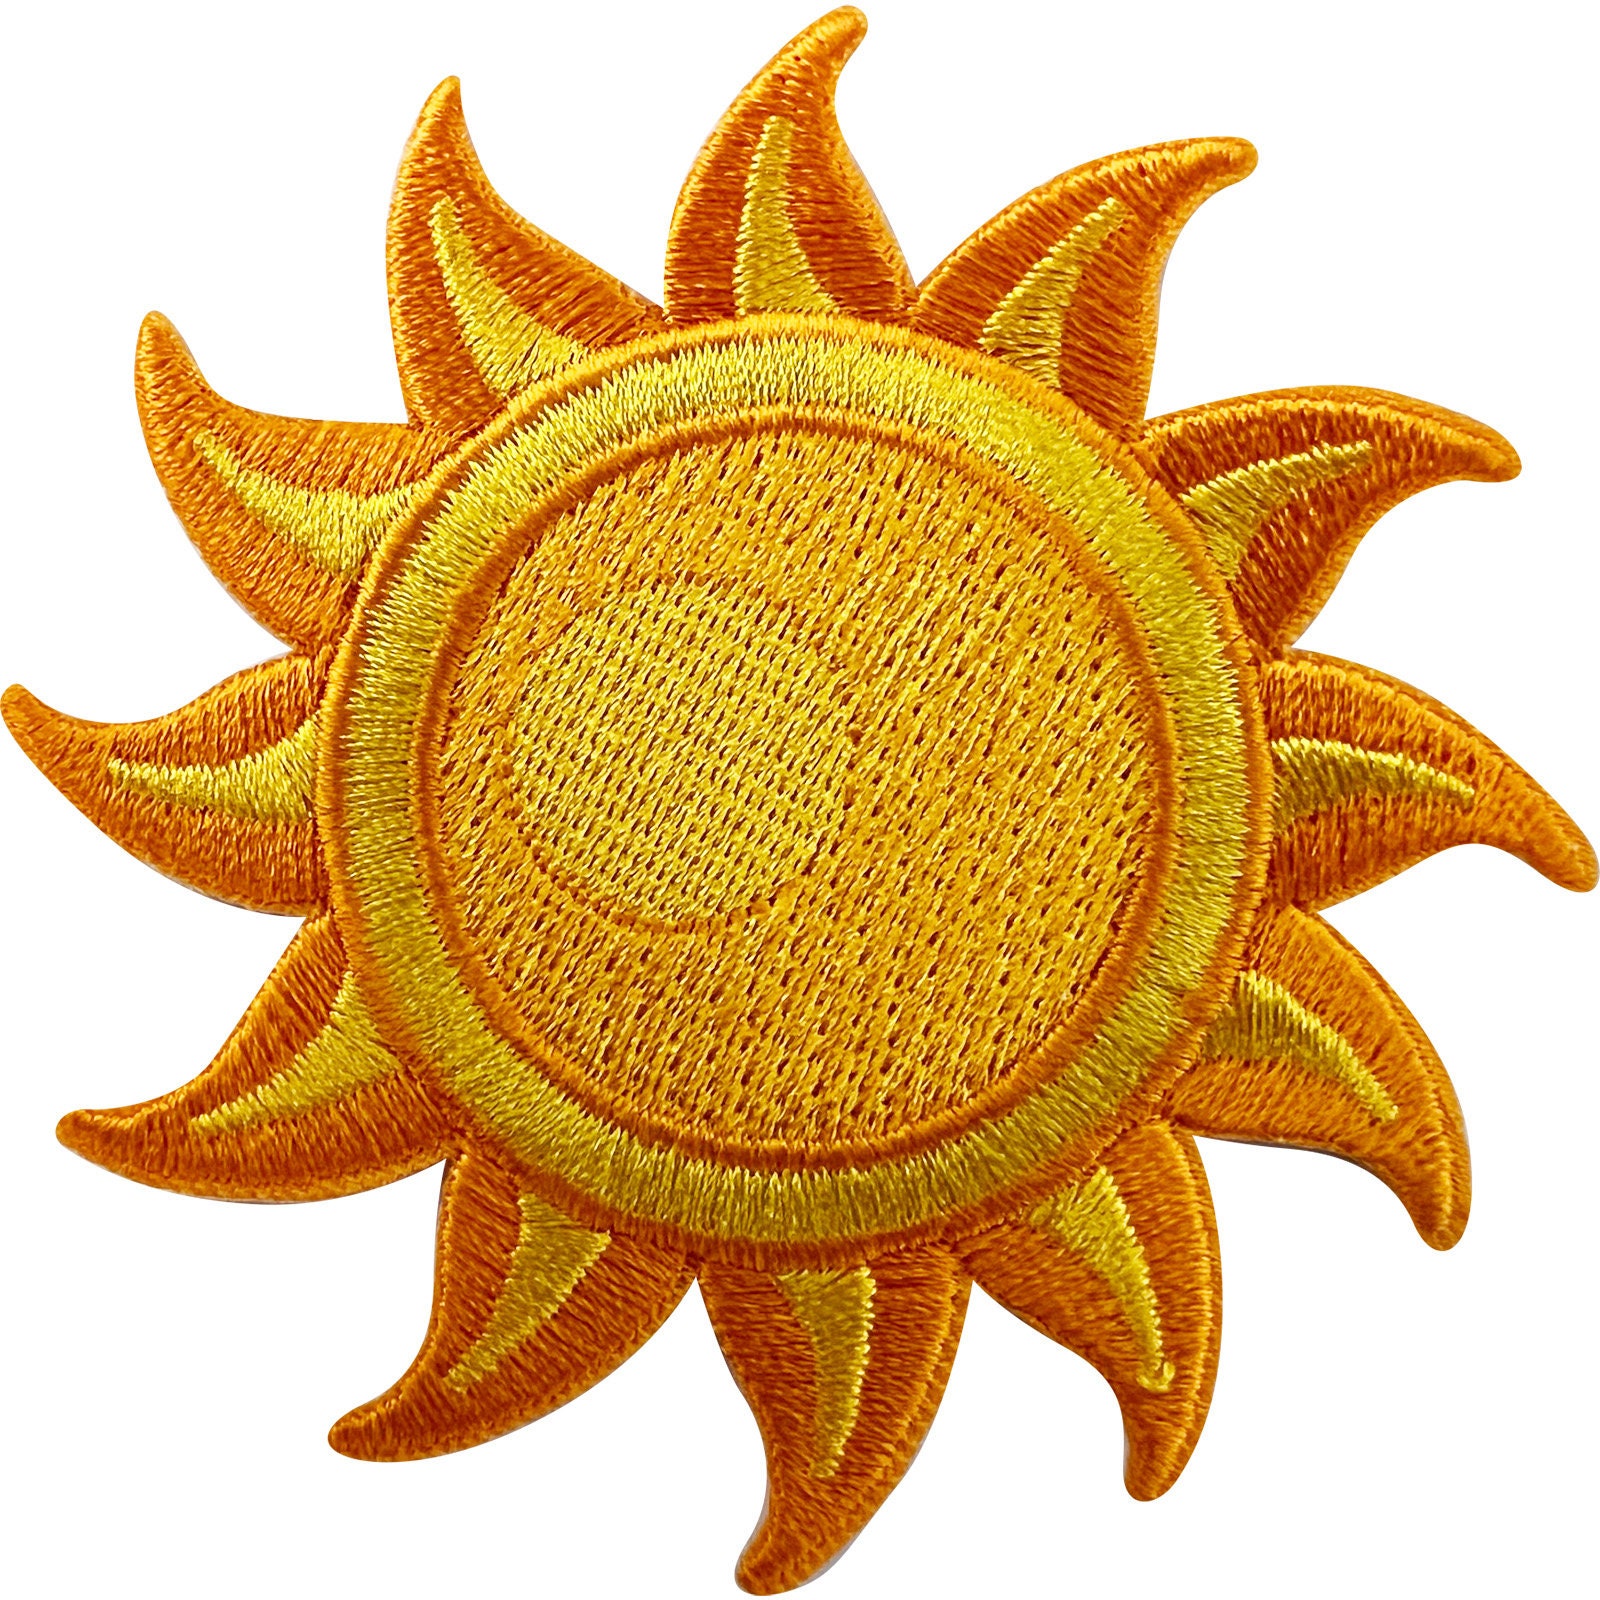 I've Got Sunshine on A Cloudy Day Embroidered Patch, Iron on